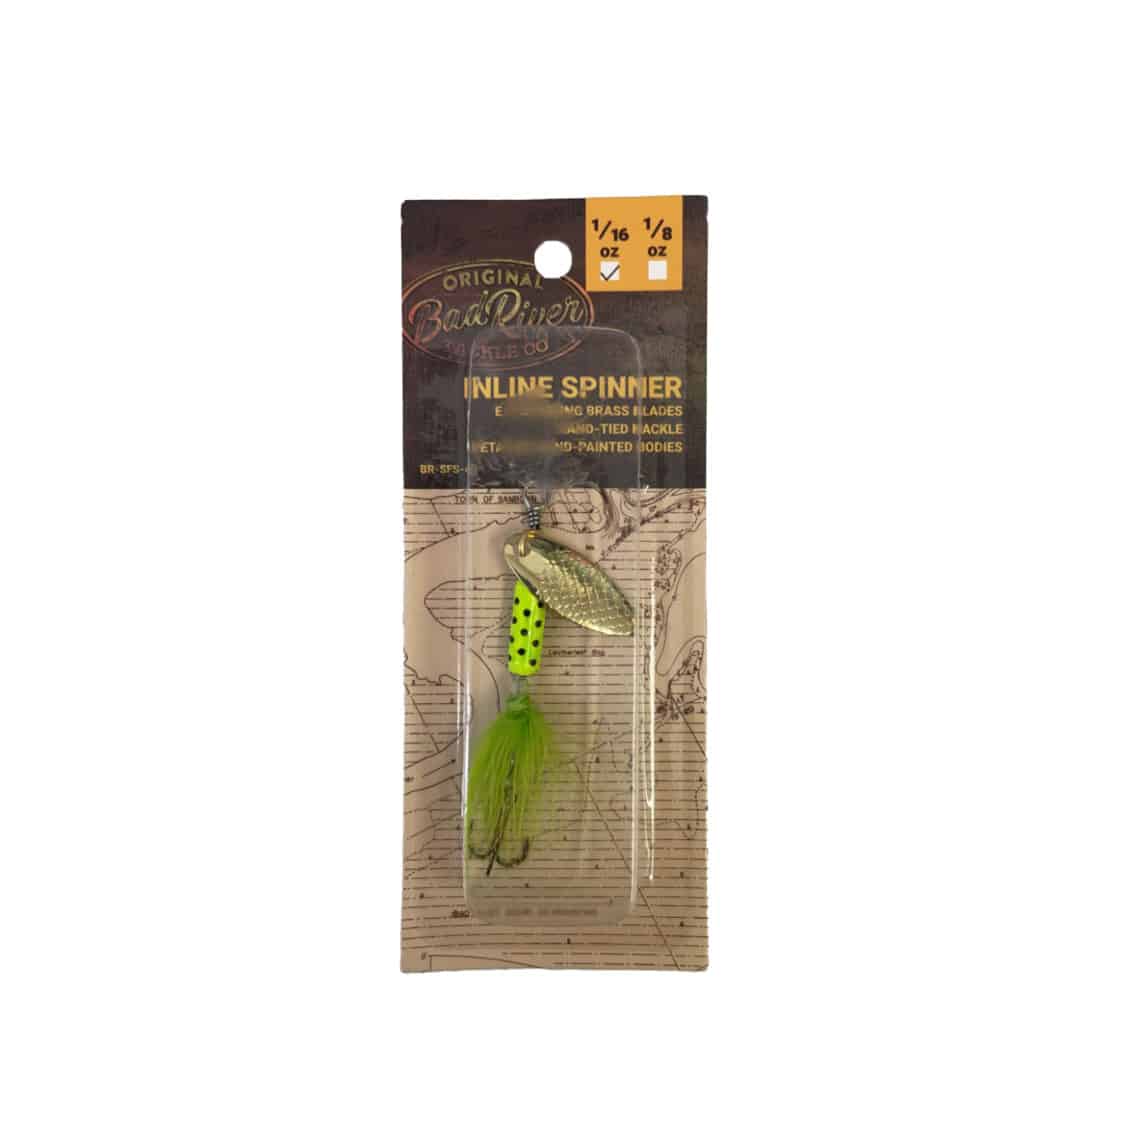 CLOSEOUT* BAD RIVER INLINE SPINNER (ONLINE ONLY) - Northwoods Wholesale  Outlet